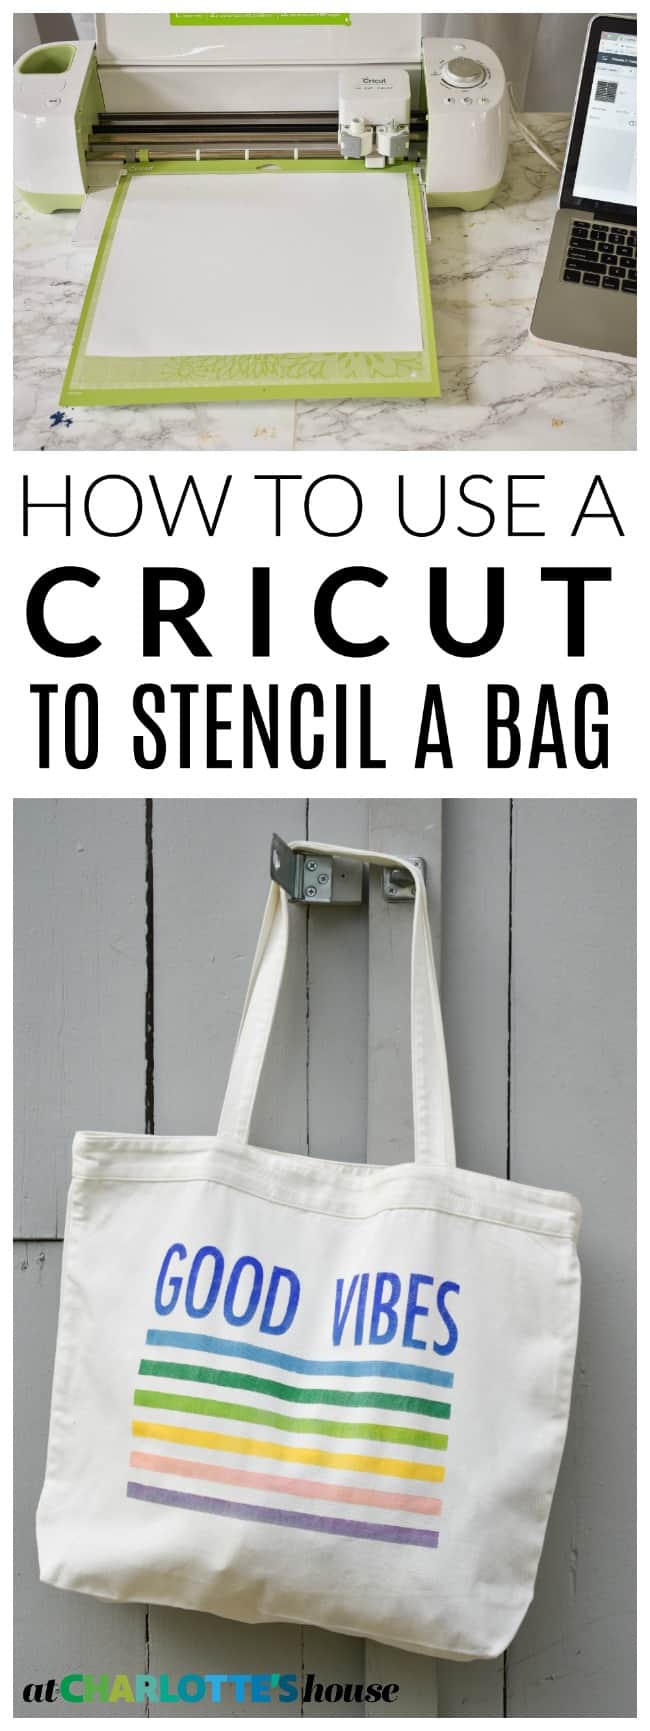 Basic instructions to use your cricut machine to make this simple colorful tote bag